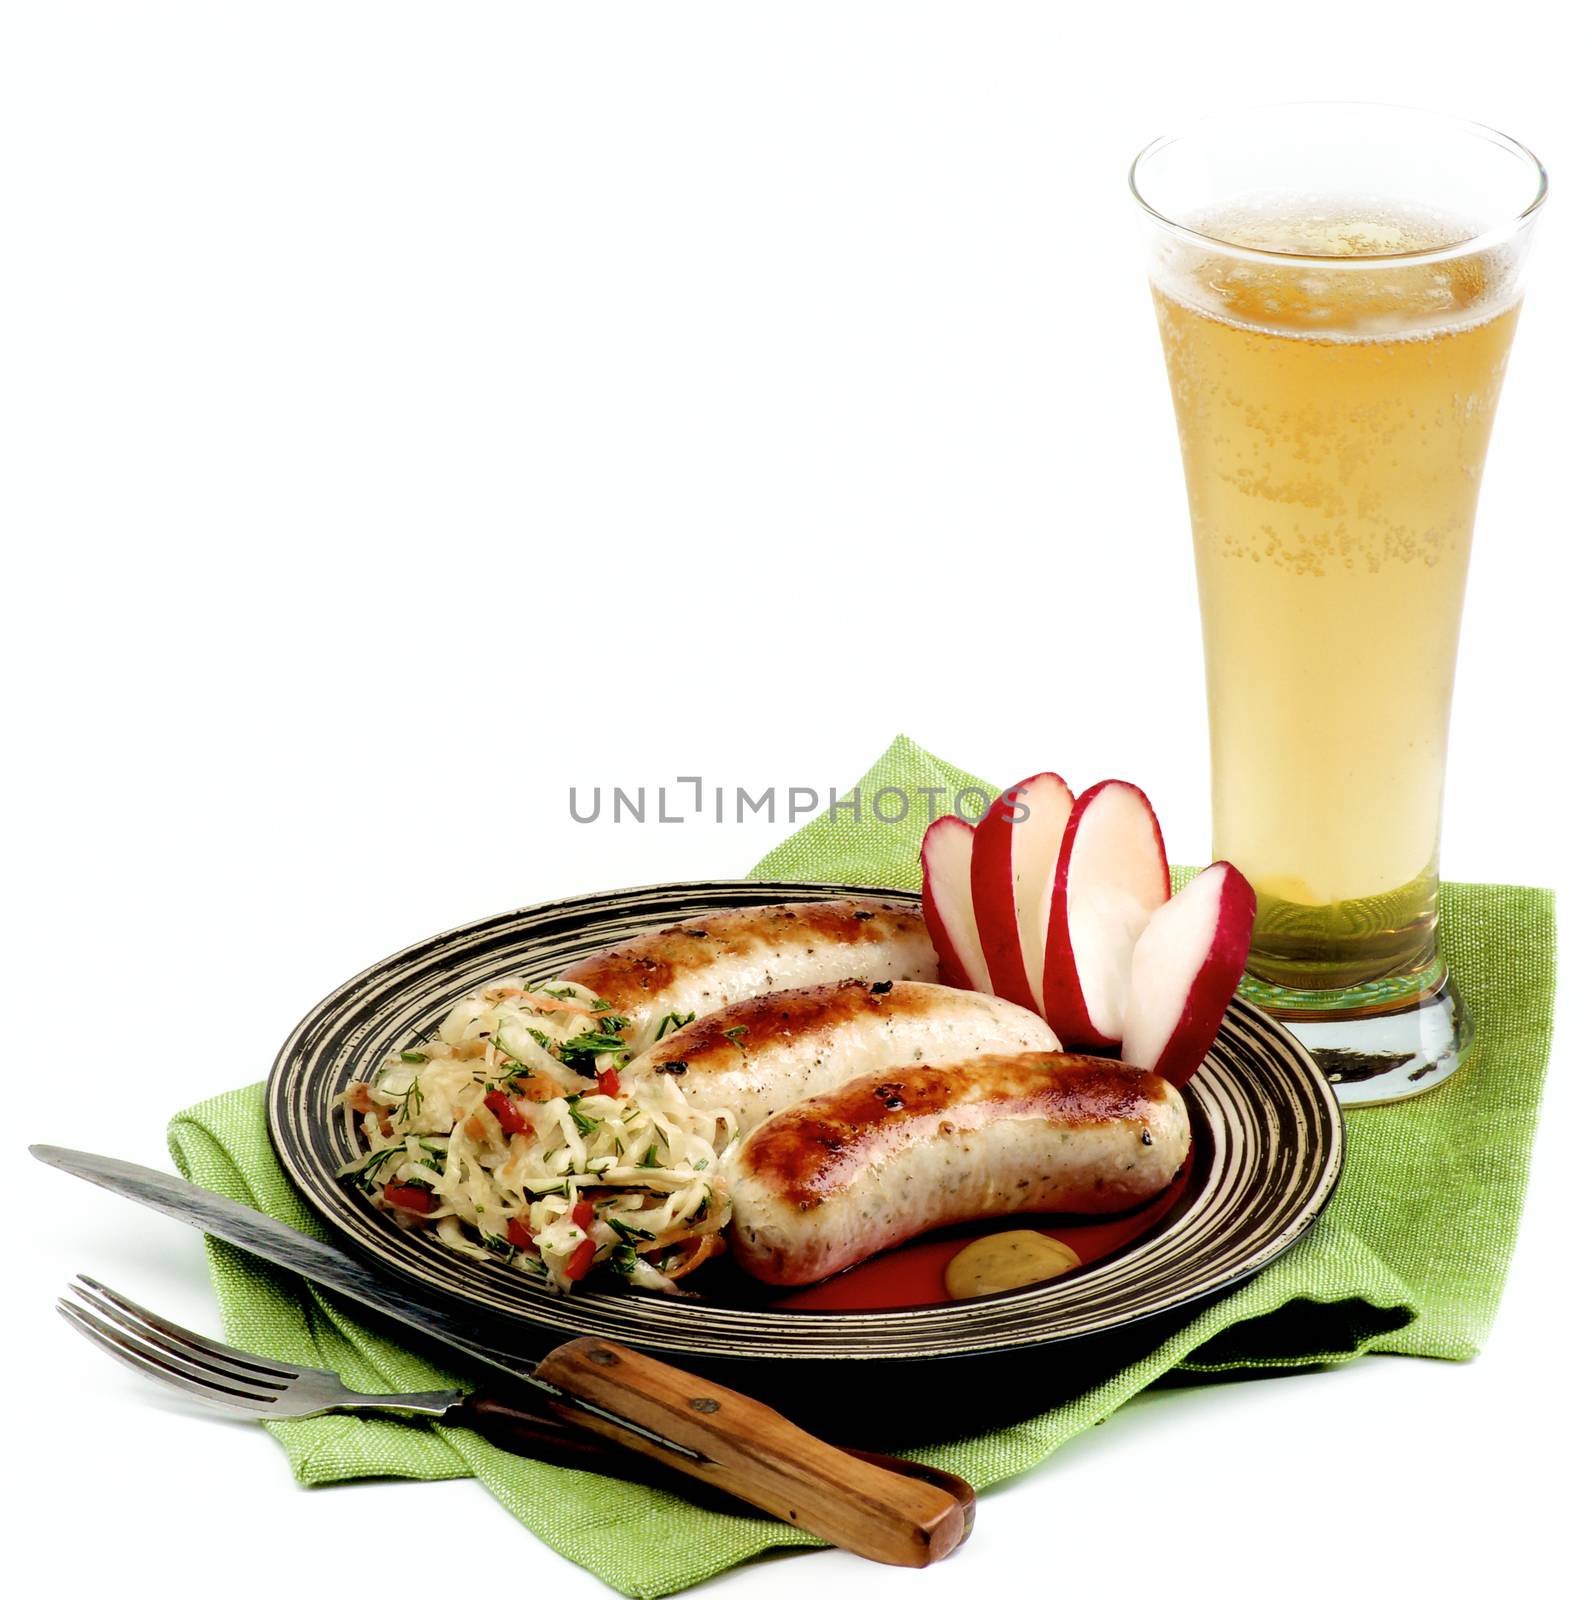 White Munich Sausages and Beer by zhekos